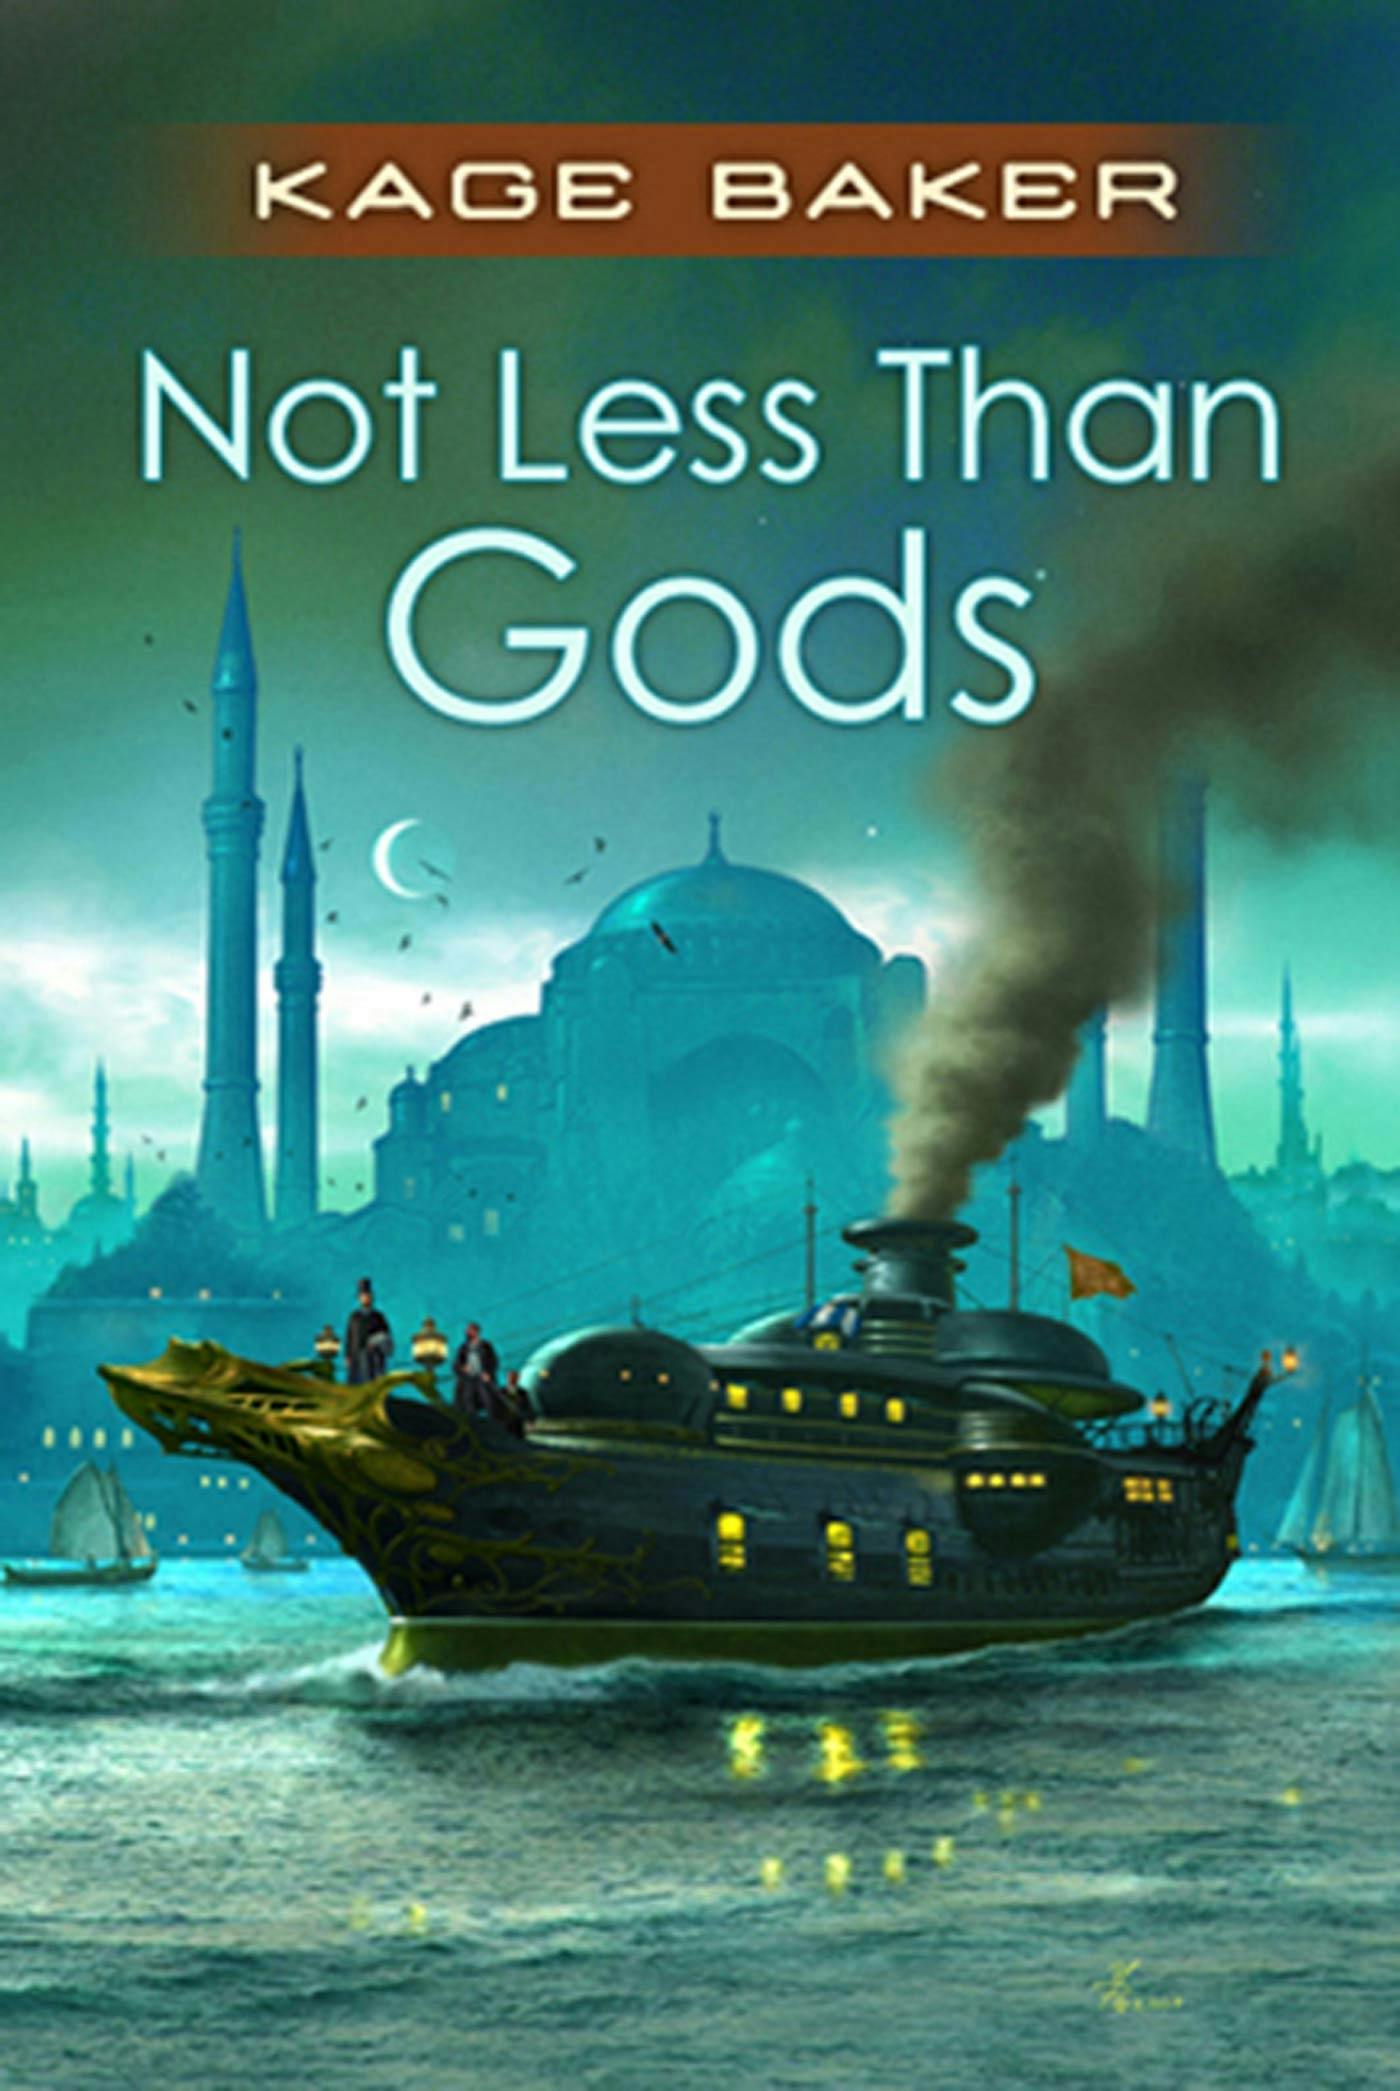 Cover for the book titled as: Not Less Than Gods